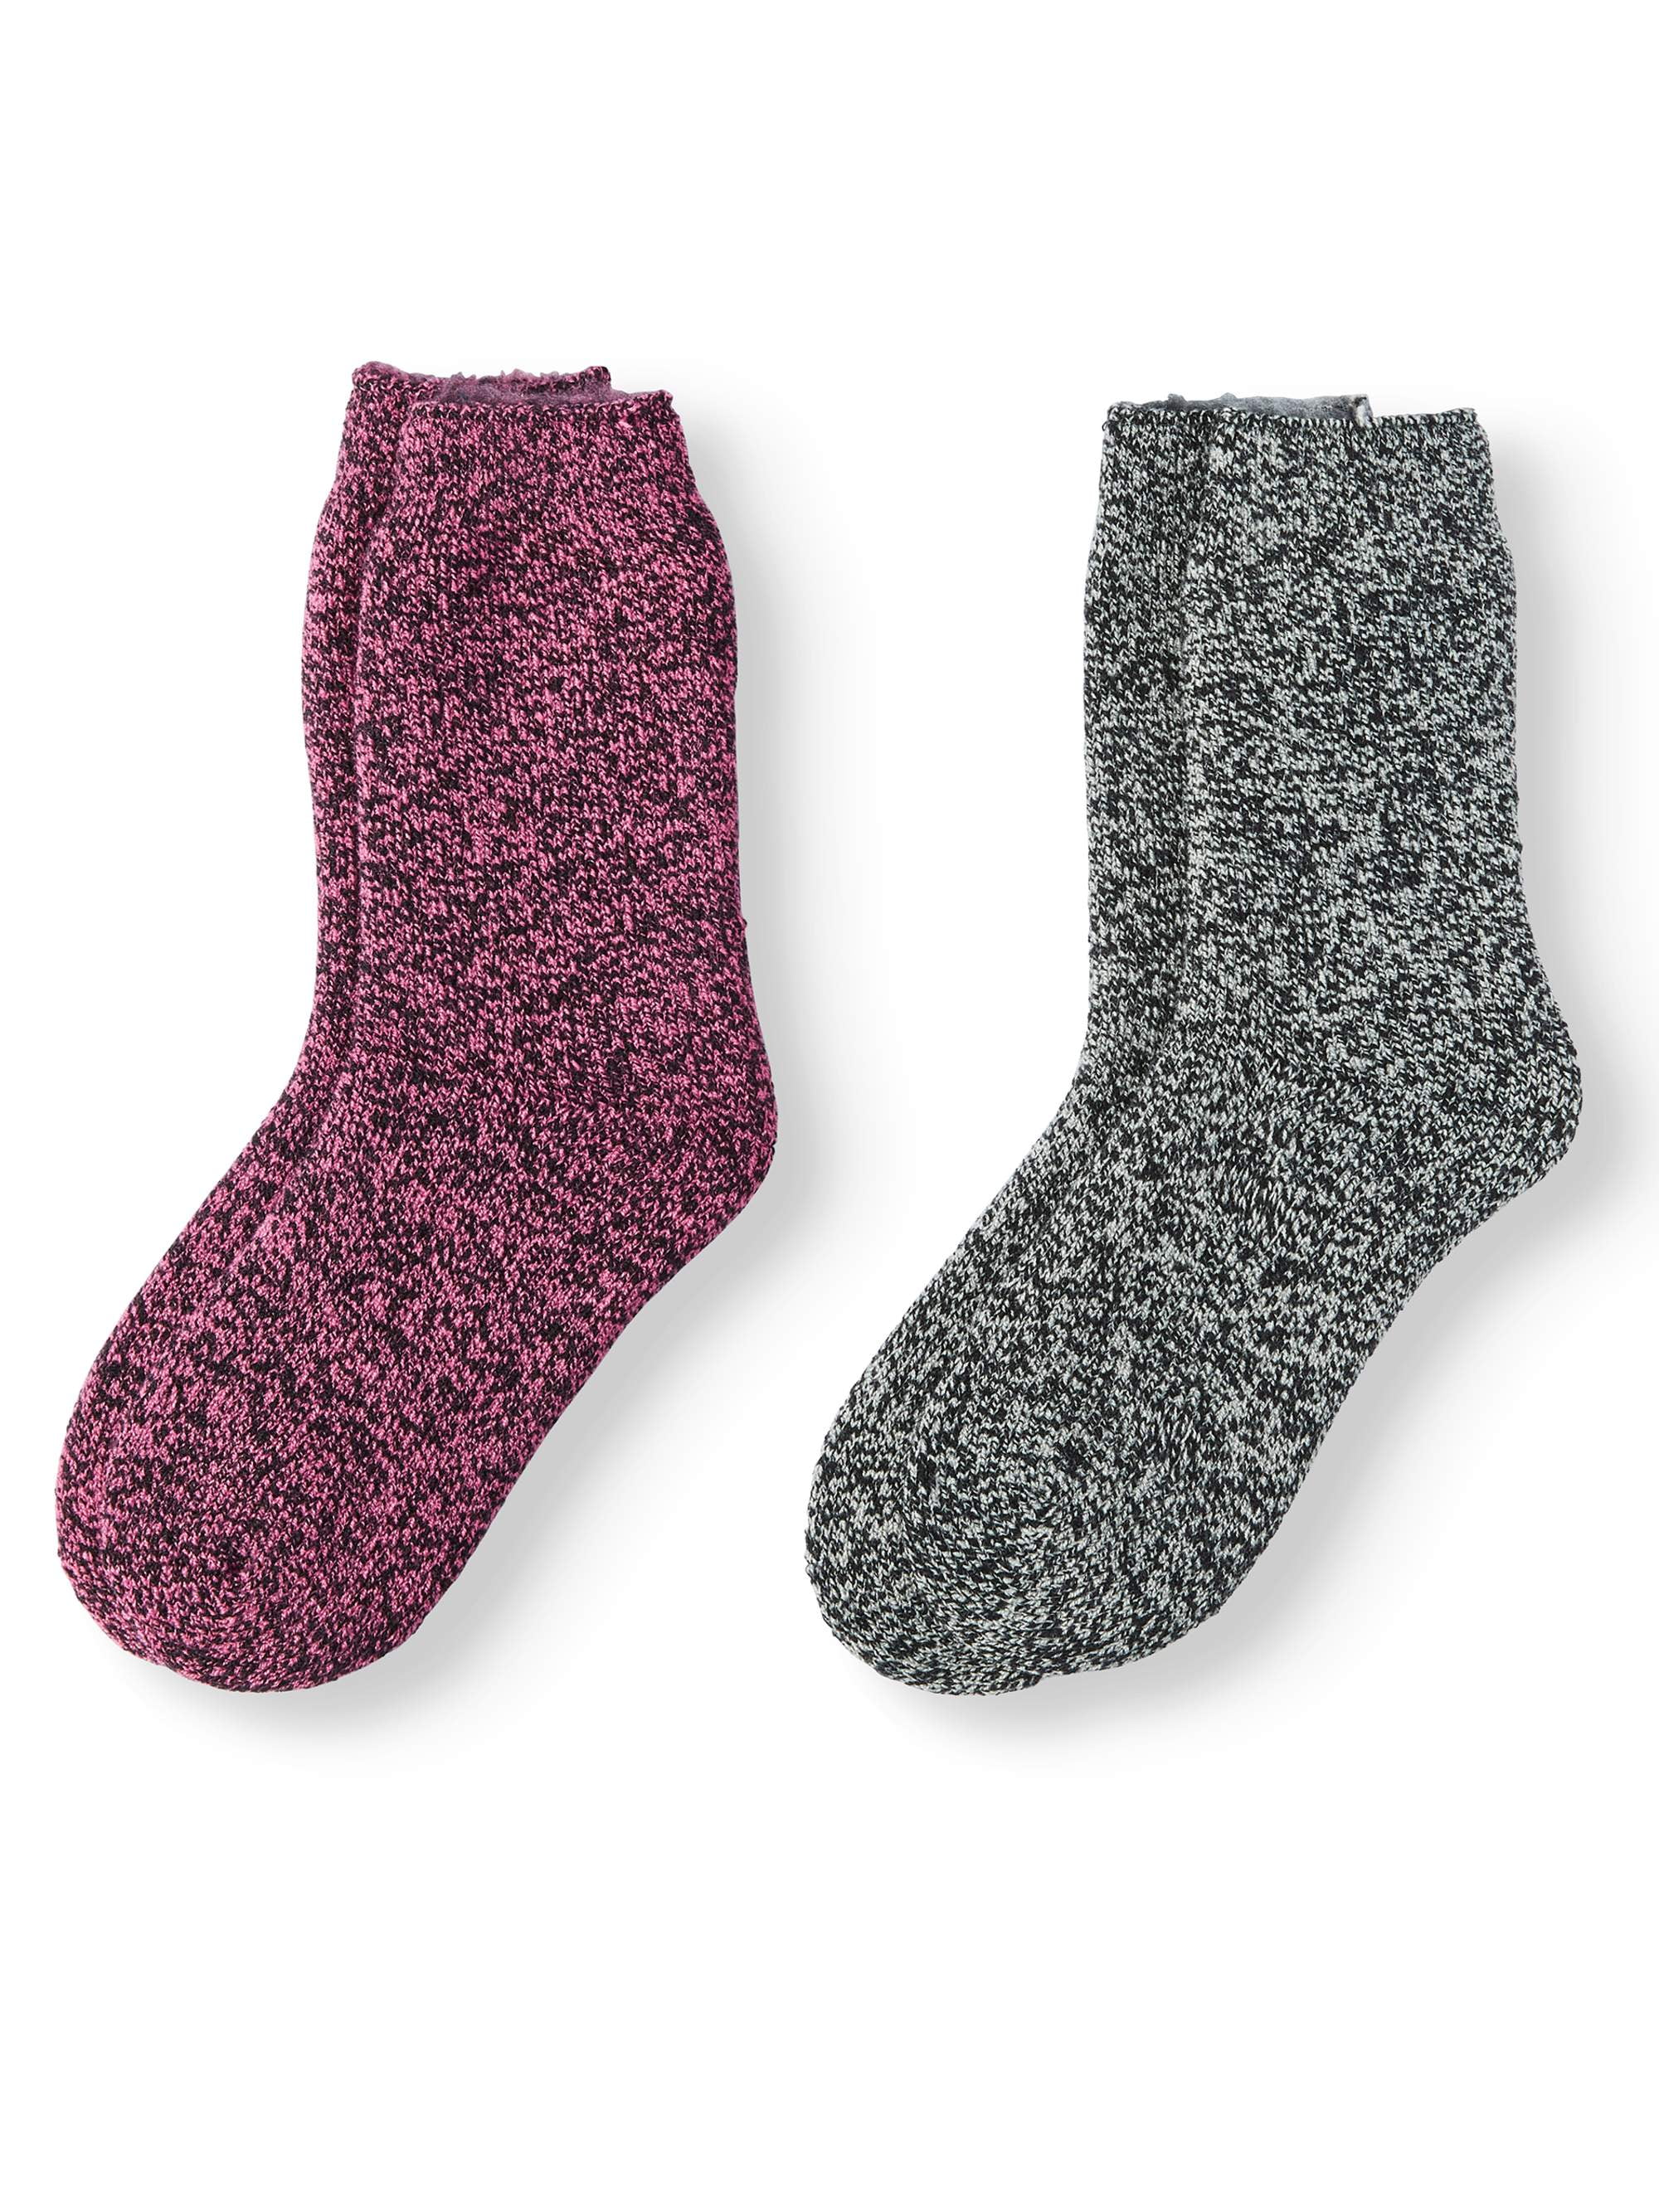 Hot Feet Women's 2 Pairs Heavy Thermal Socks - Thick Insulated Crew for  Cold Weather 